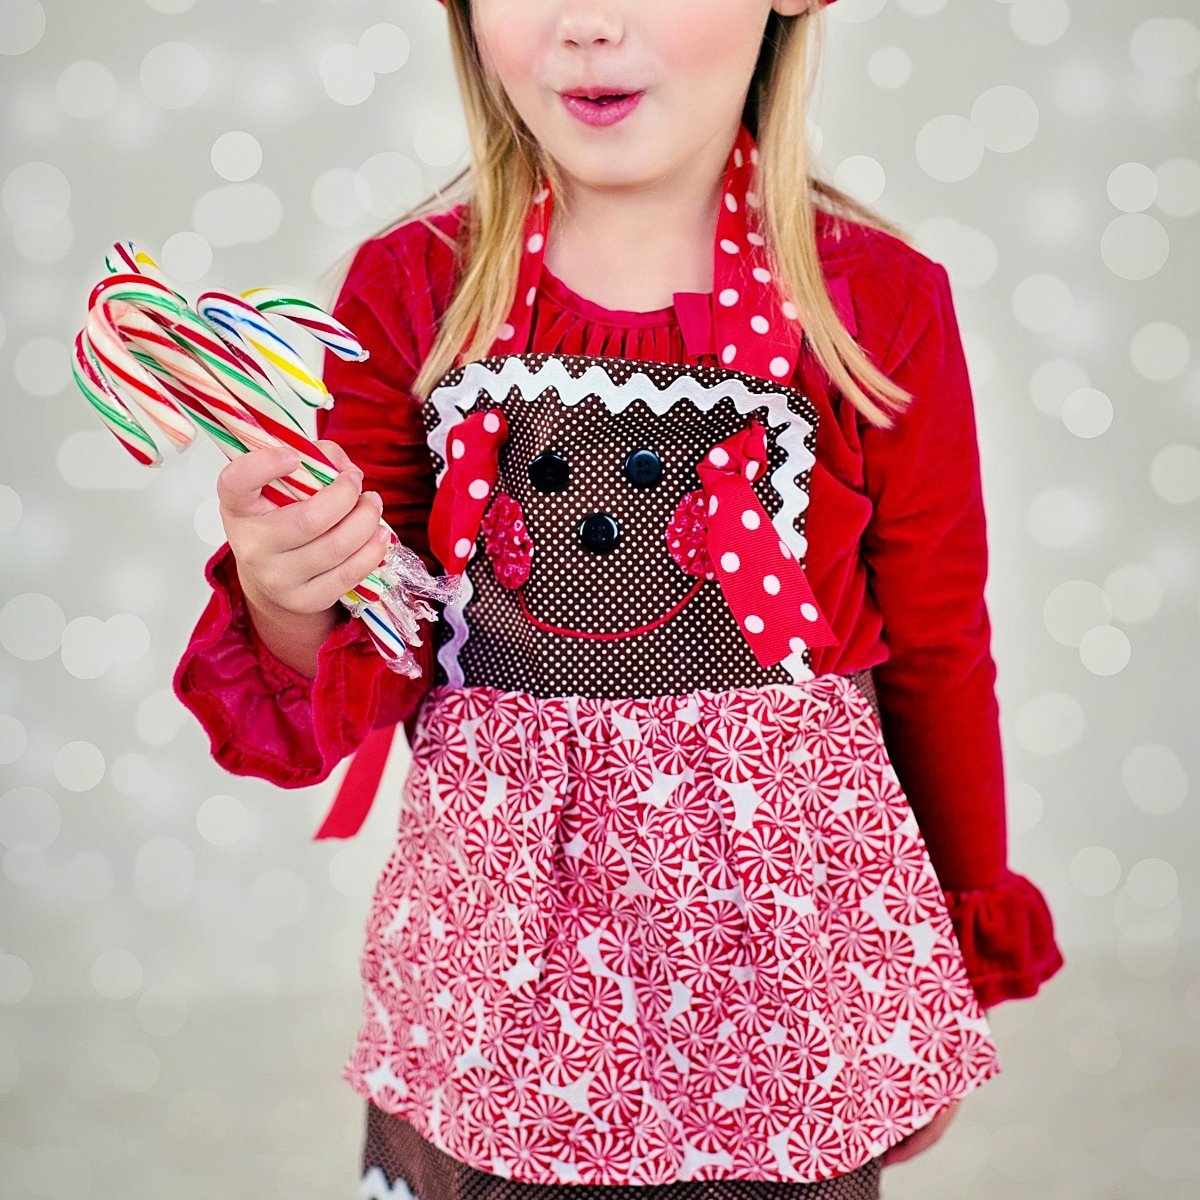 Young girl dressed in Christmas attire holding a bunch of striped candy canes